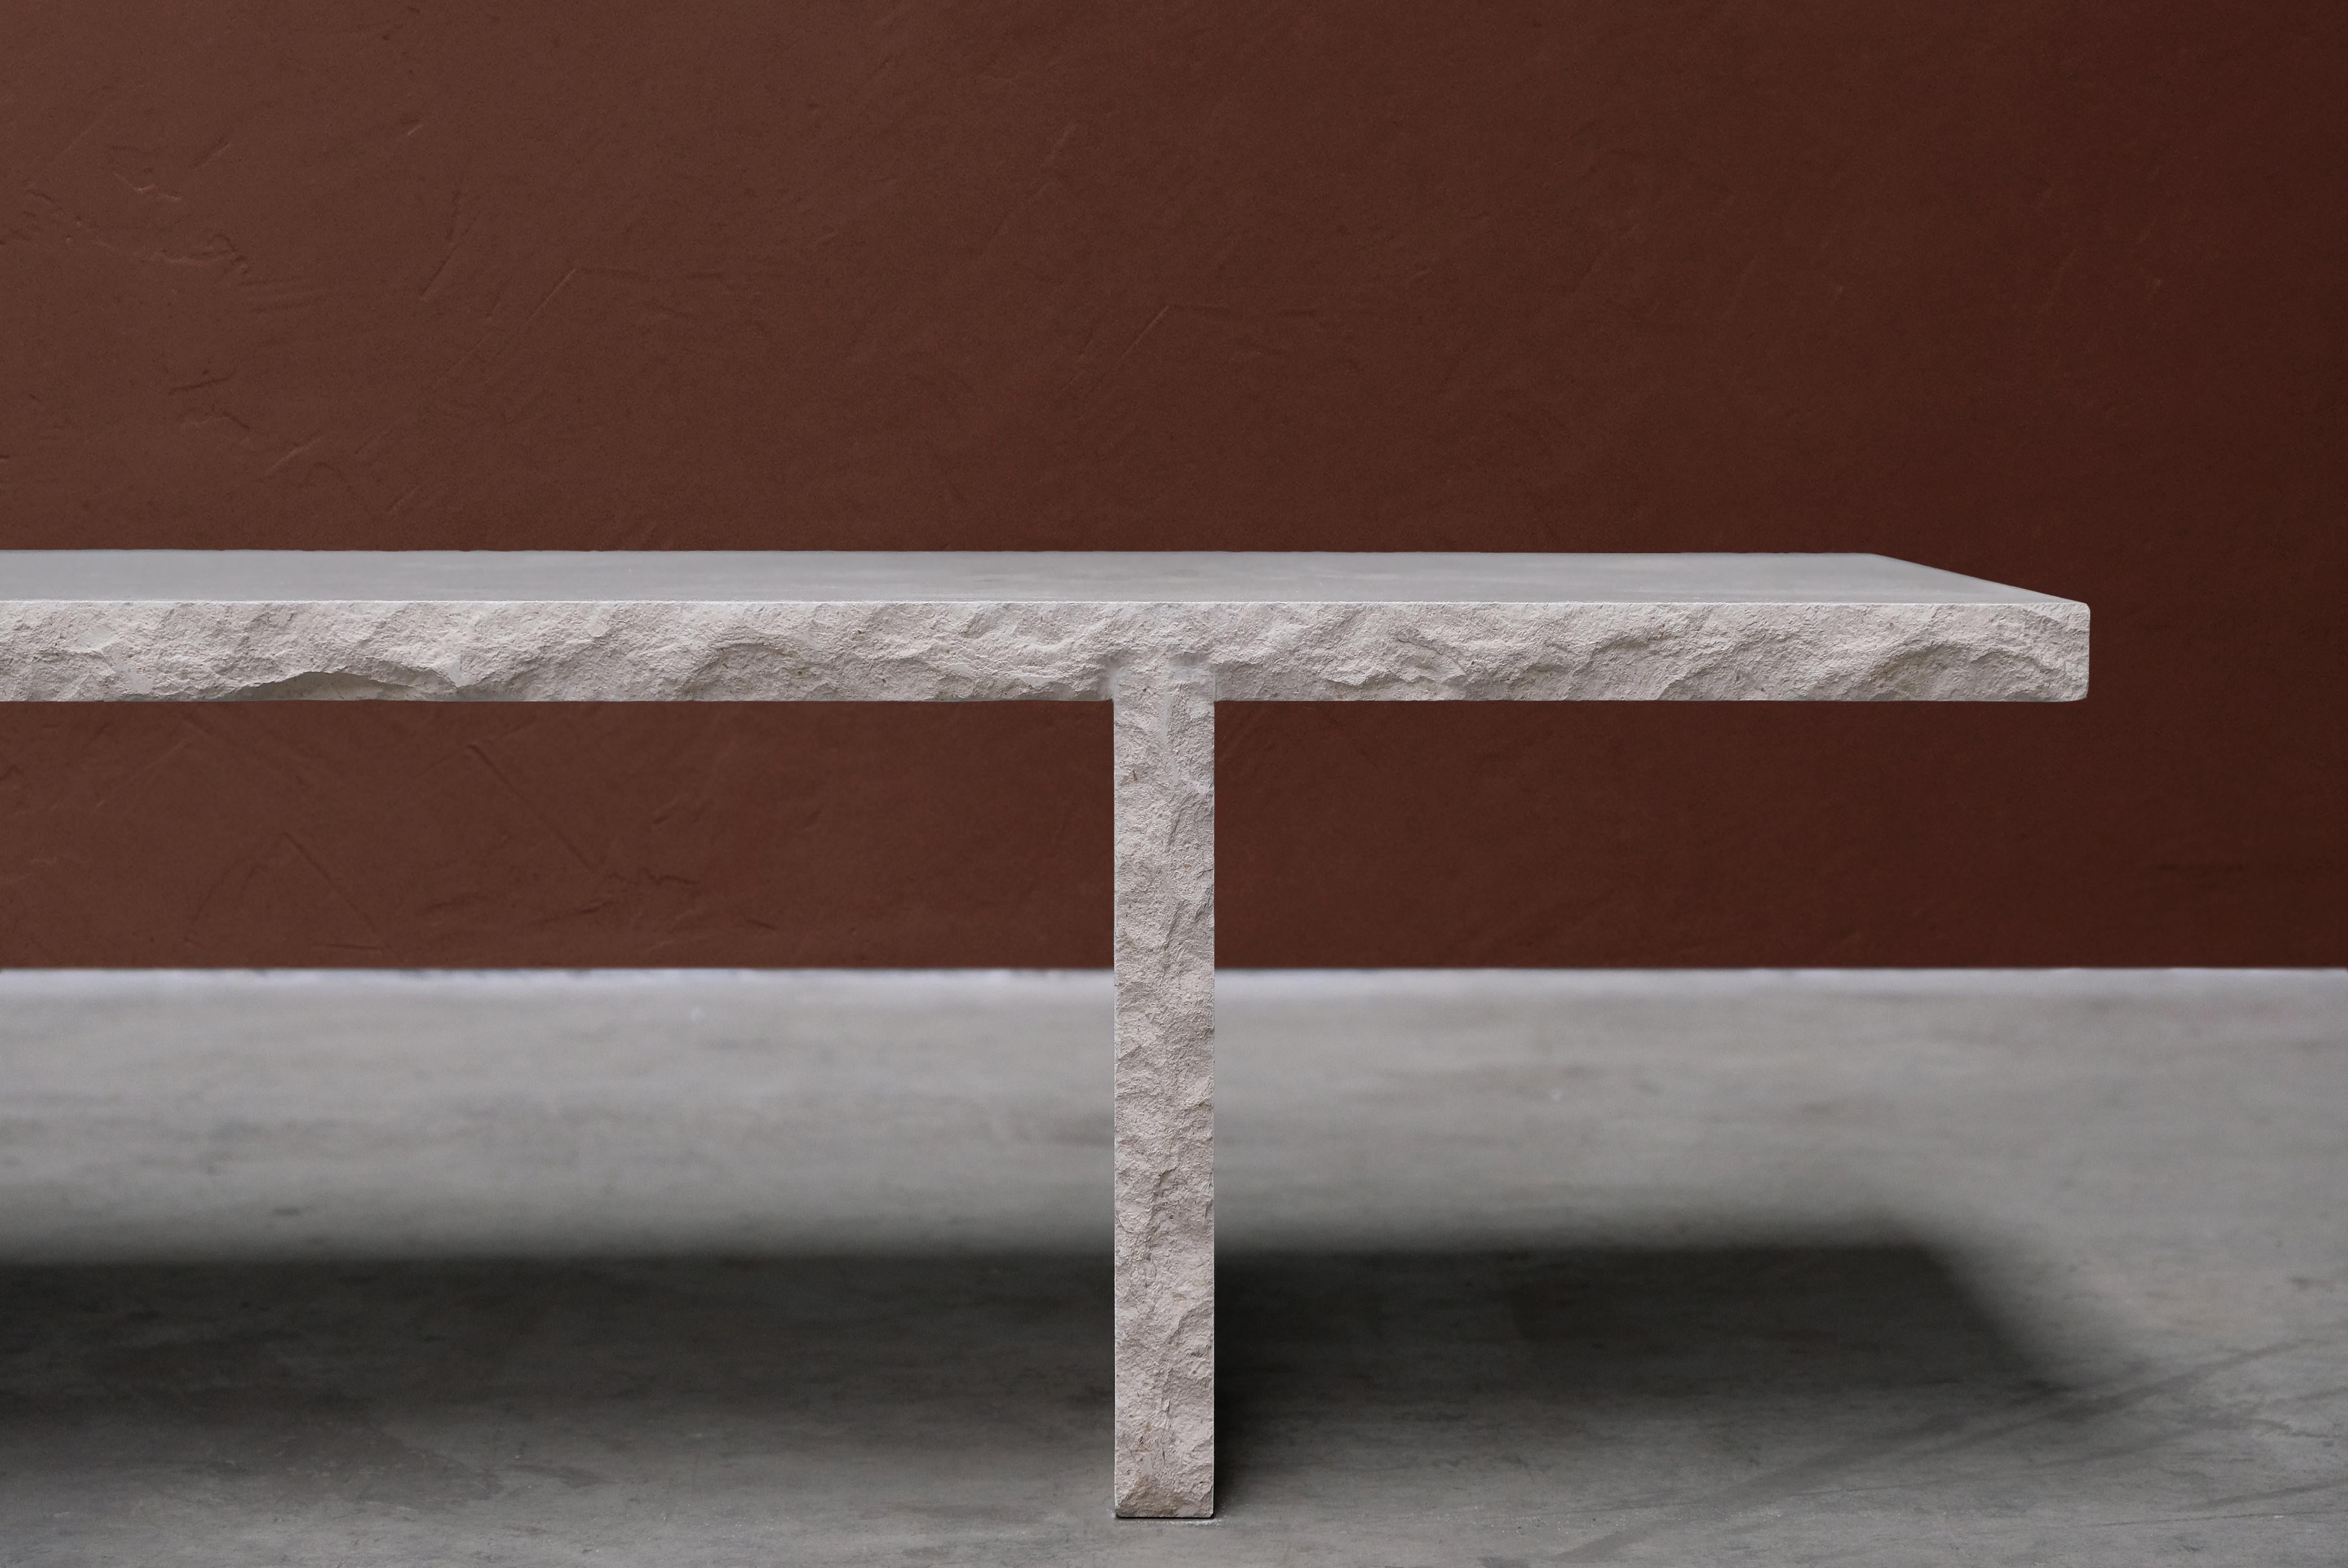 French Sculpted Bourgogne Stone Coffee Table, Fruste by Frederic Saulou